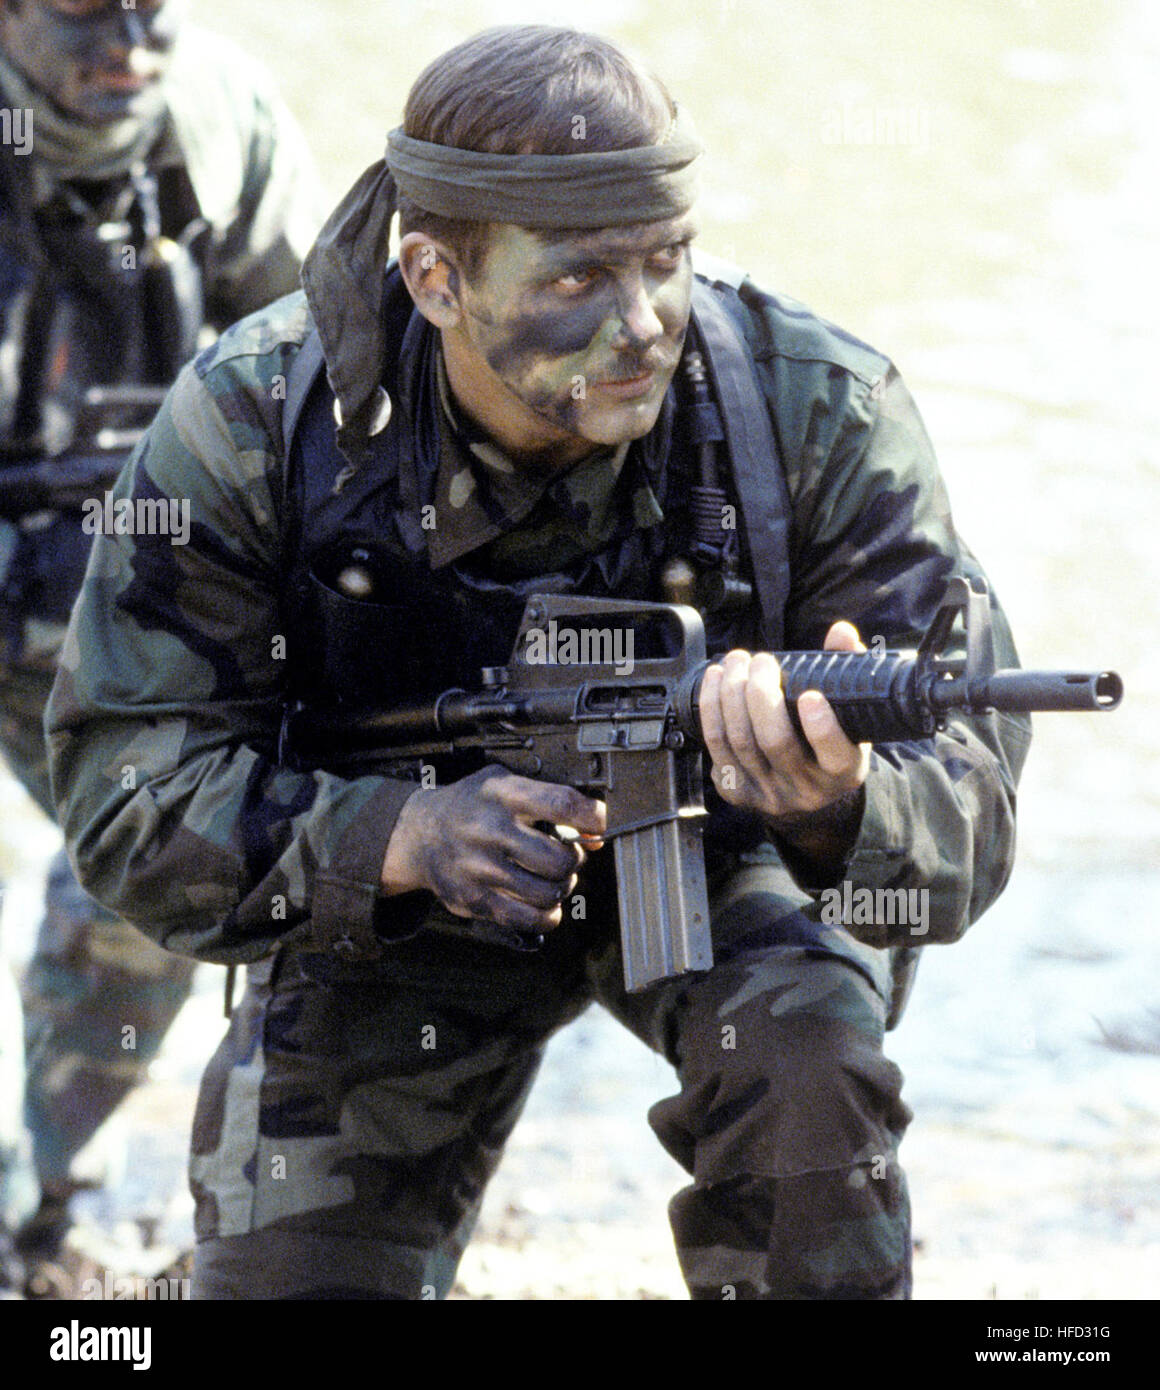 Boatswain's Mate 1st Class Mark Blasen, foreground, and Photographer's Mate 2nd Class Peter Rogers, both members of Sea-Air-Land (SEAL) Team 4, participate in a training exercise.  Blasen is armed with a 5.56 mm Colt Commando assault rifle/submarine gun.  All Hands - April 1985. SEAL Colt Commando v2 Stock Photo